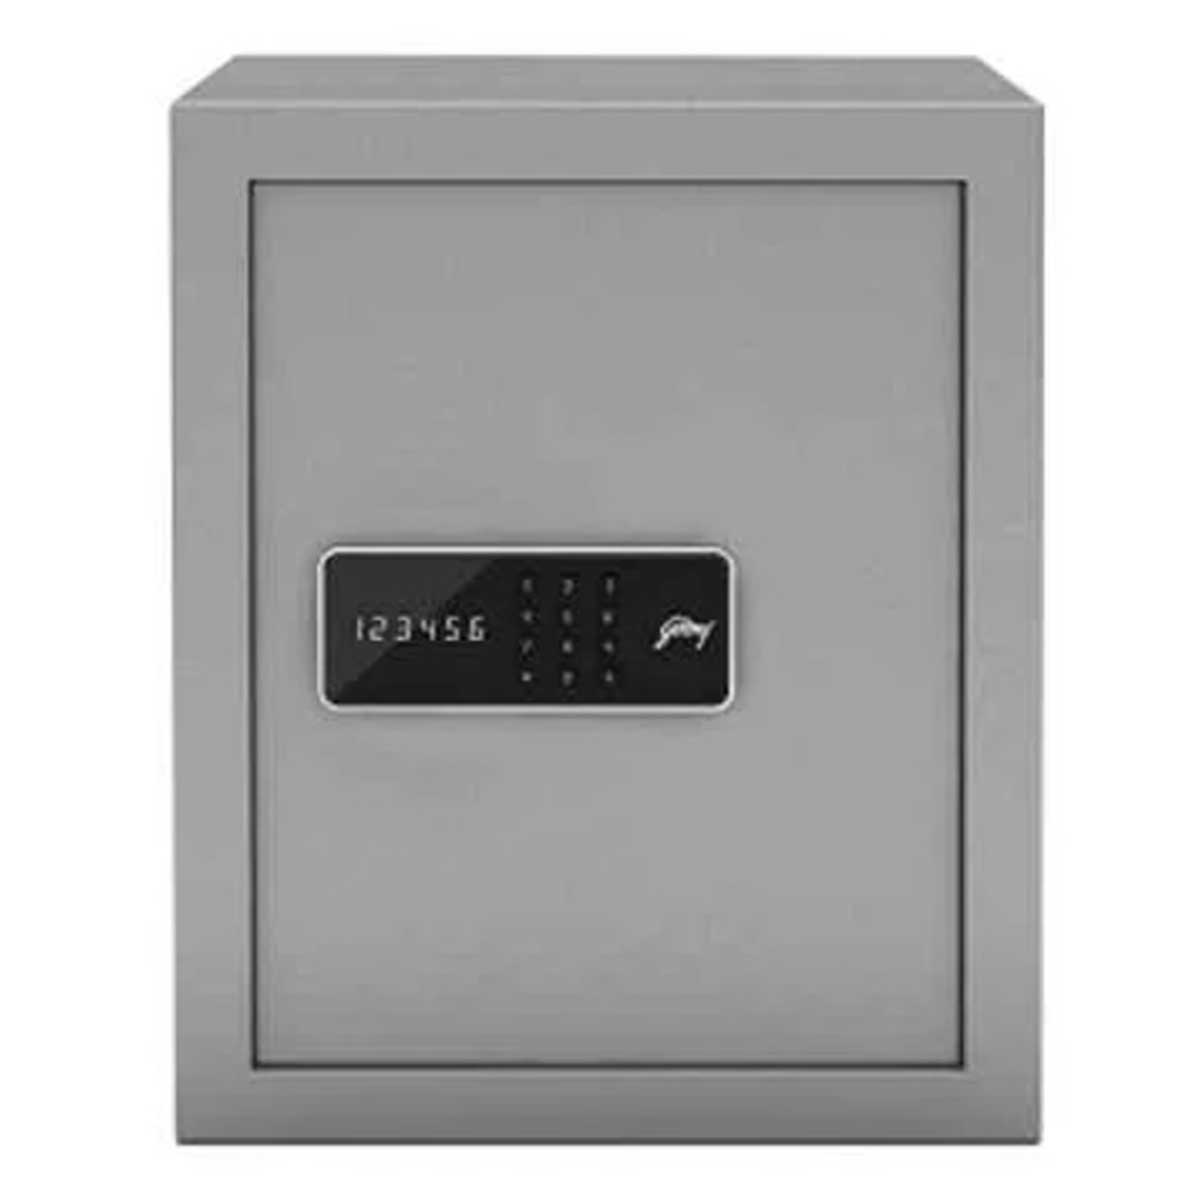 Steel security safe Manufacturers, Suppliers in Faridabad